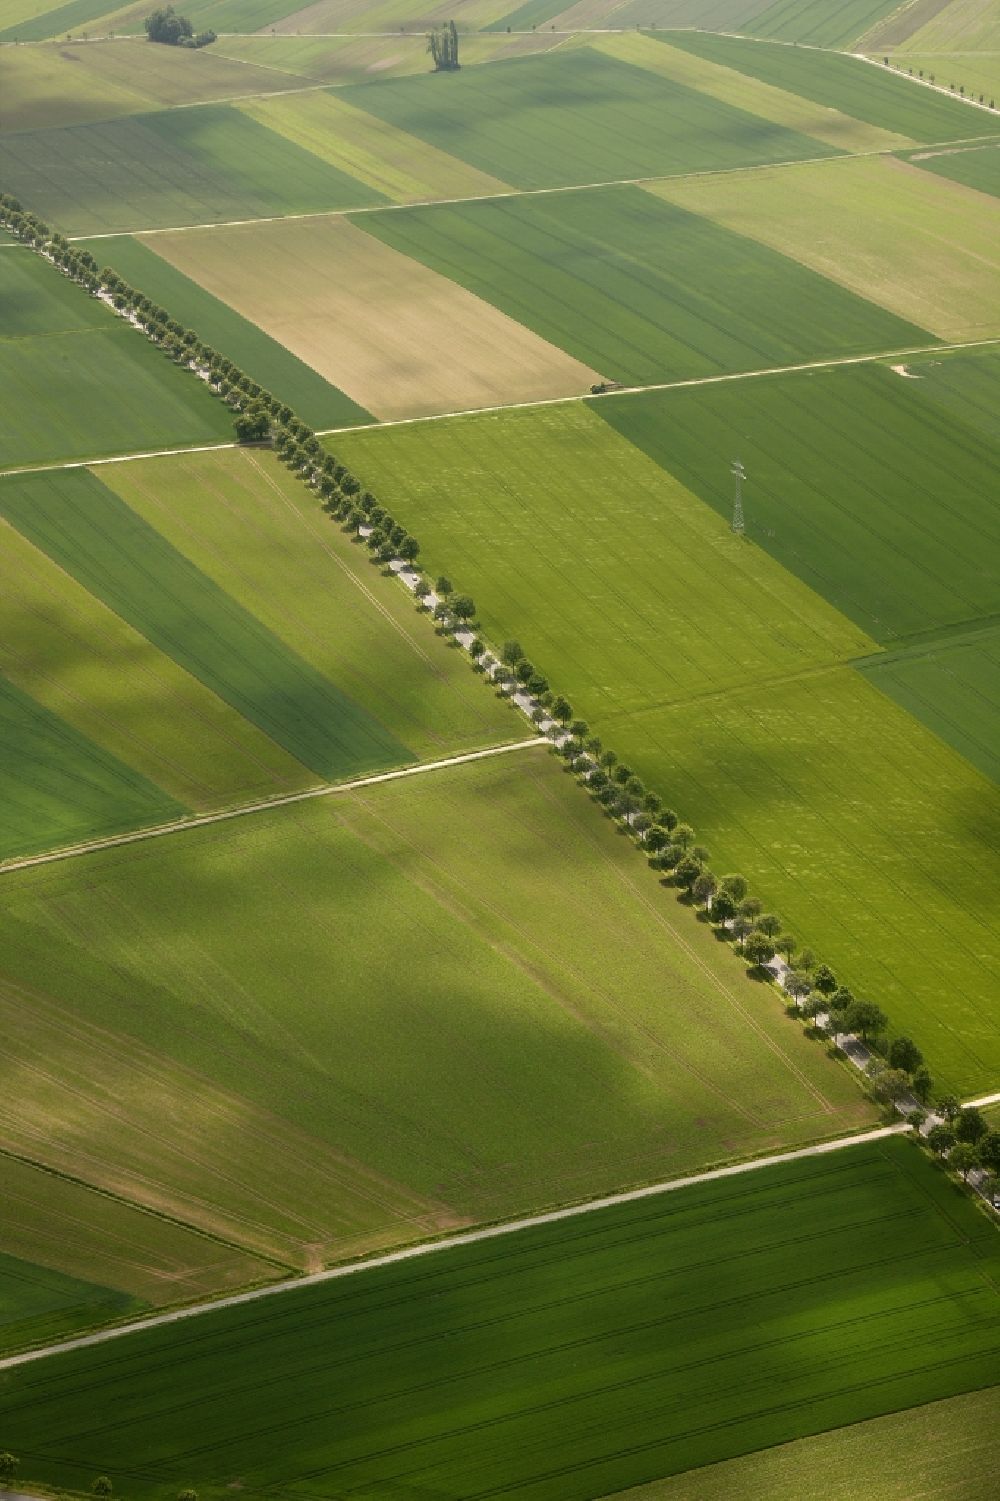 Aerial photograph Emmerthal OT Grohnde - View of tree and field structures in the district of Grohnde in Emmerthal in the state of Lower Saxony